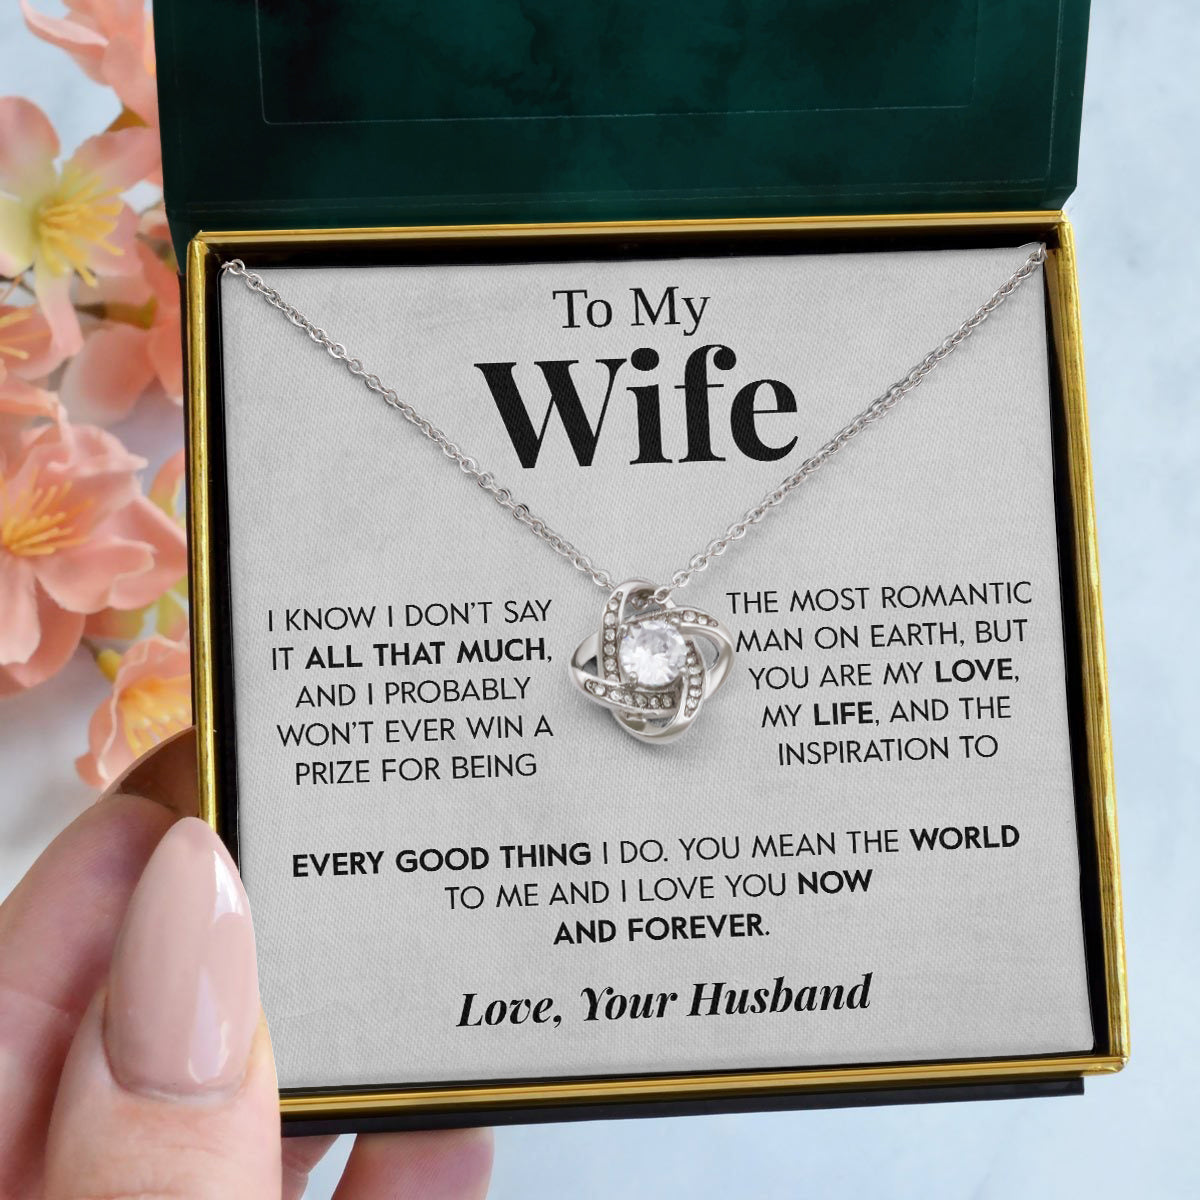 To My Wife | "Every Good Thing" | Love Knot Necklace